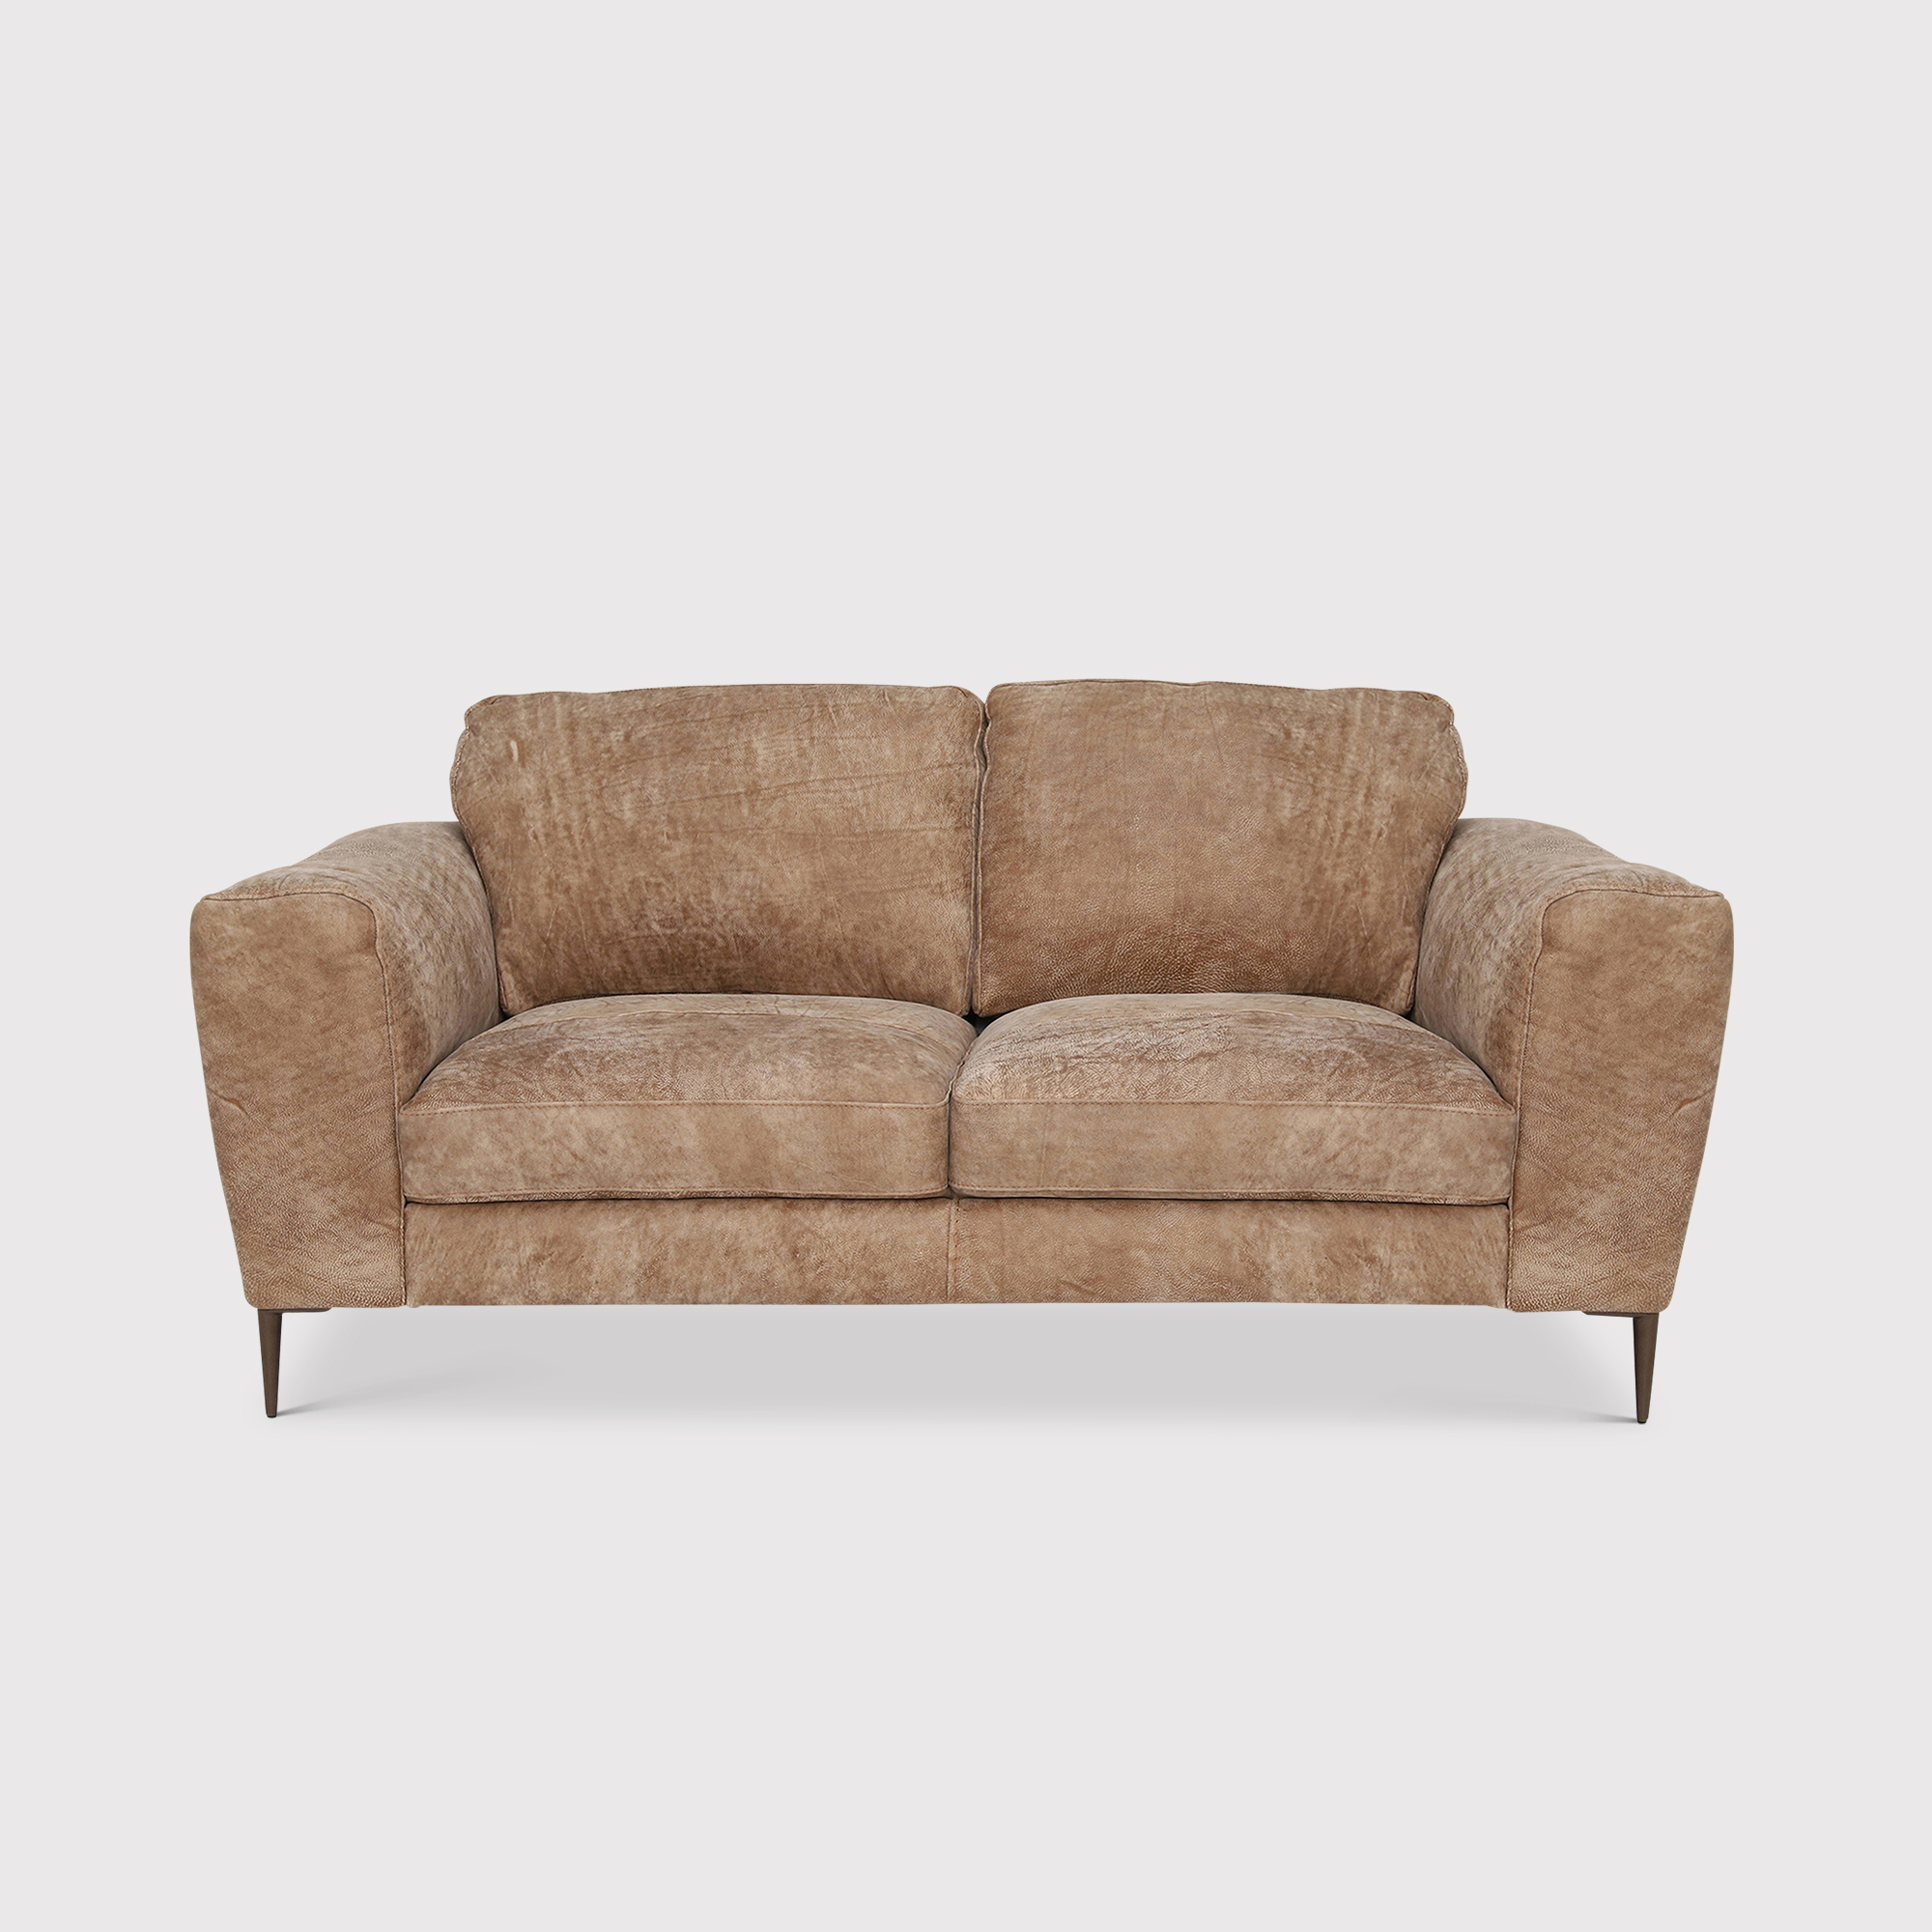 Troy Loveseat Sofa, Brown Leather | Barker & Stonehouse